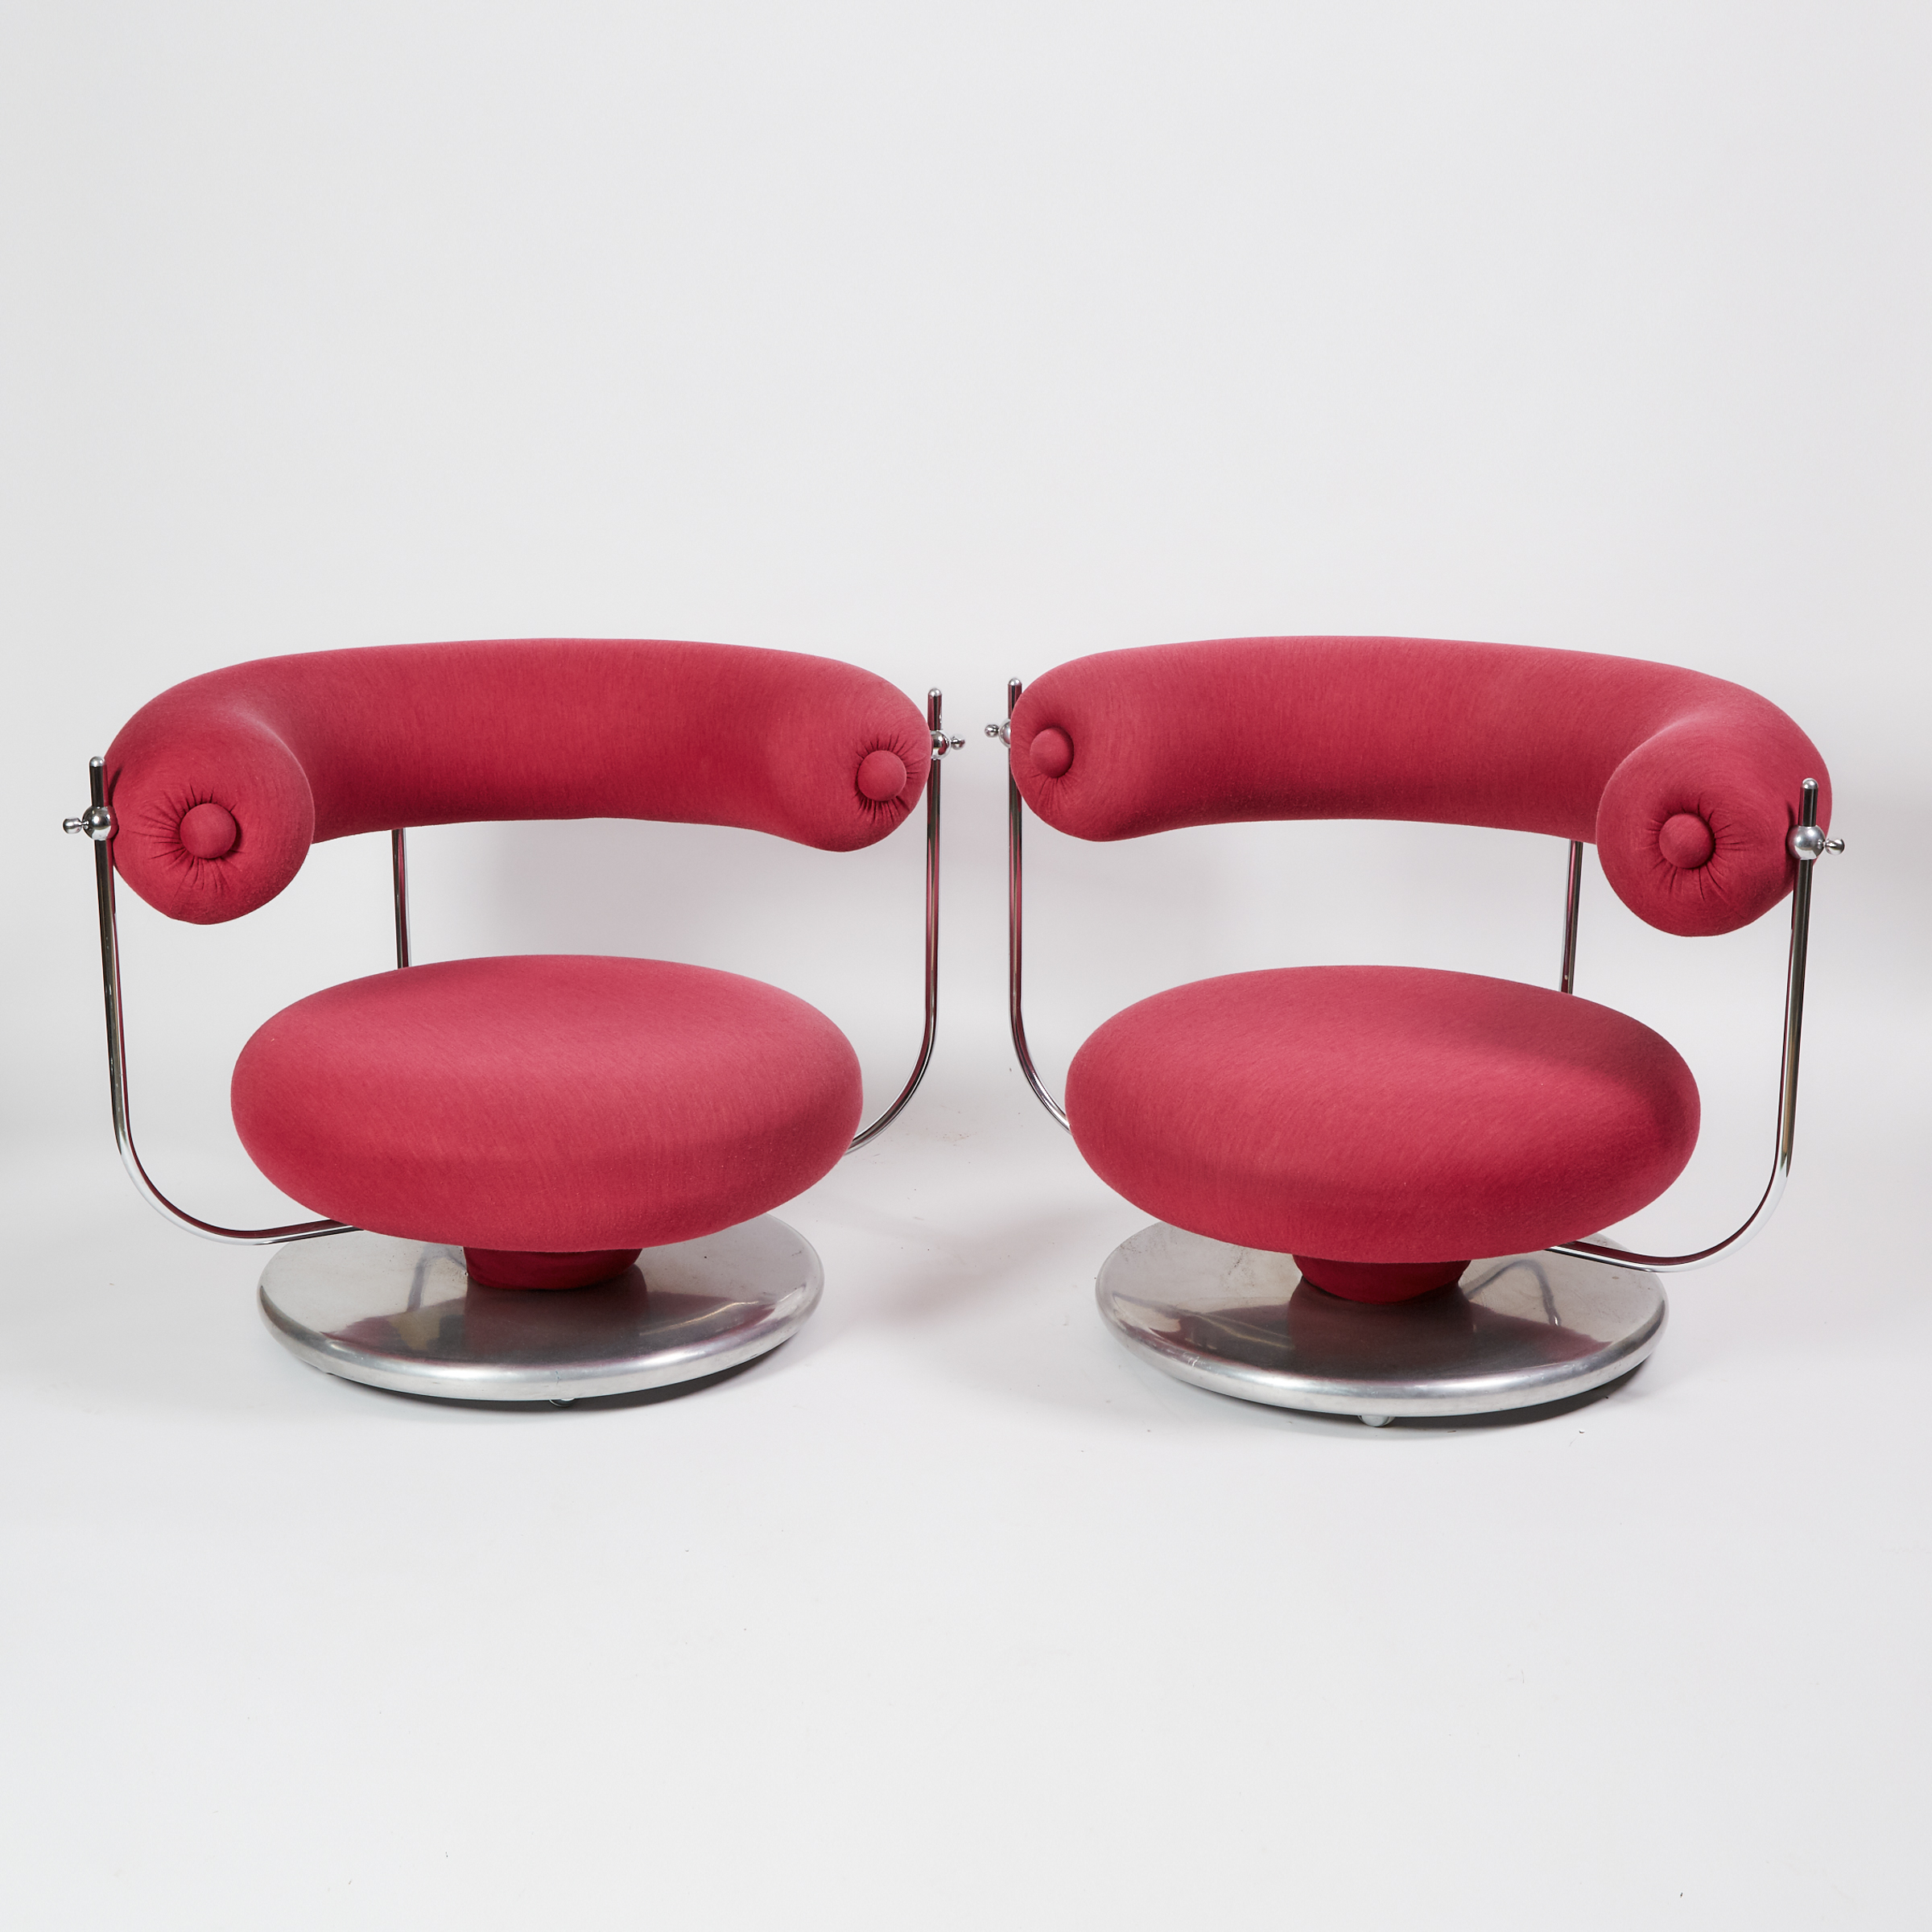 Pair of S401 Lounge Chairs by Verner Panton for Thonet, 1967